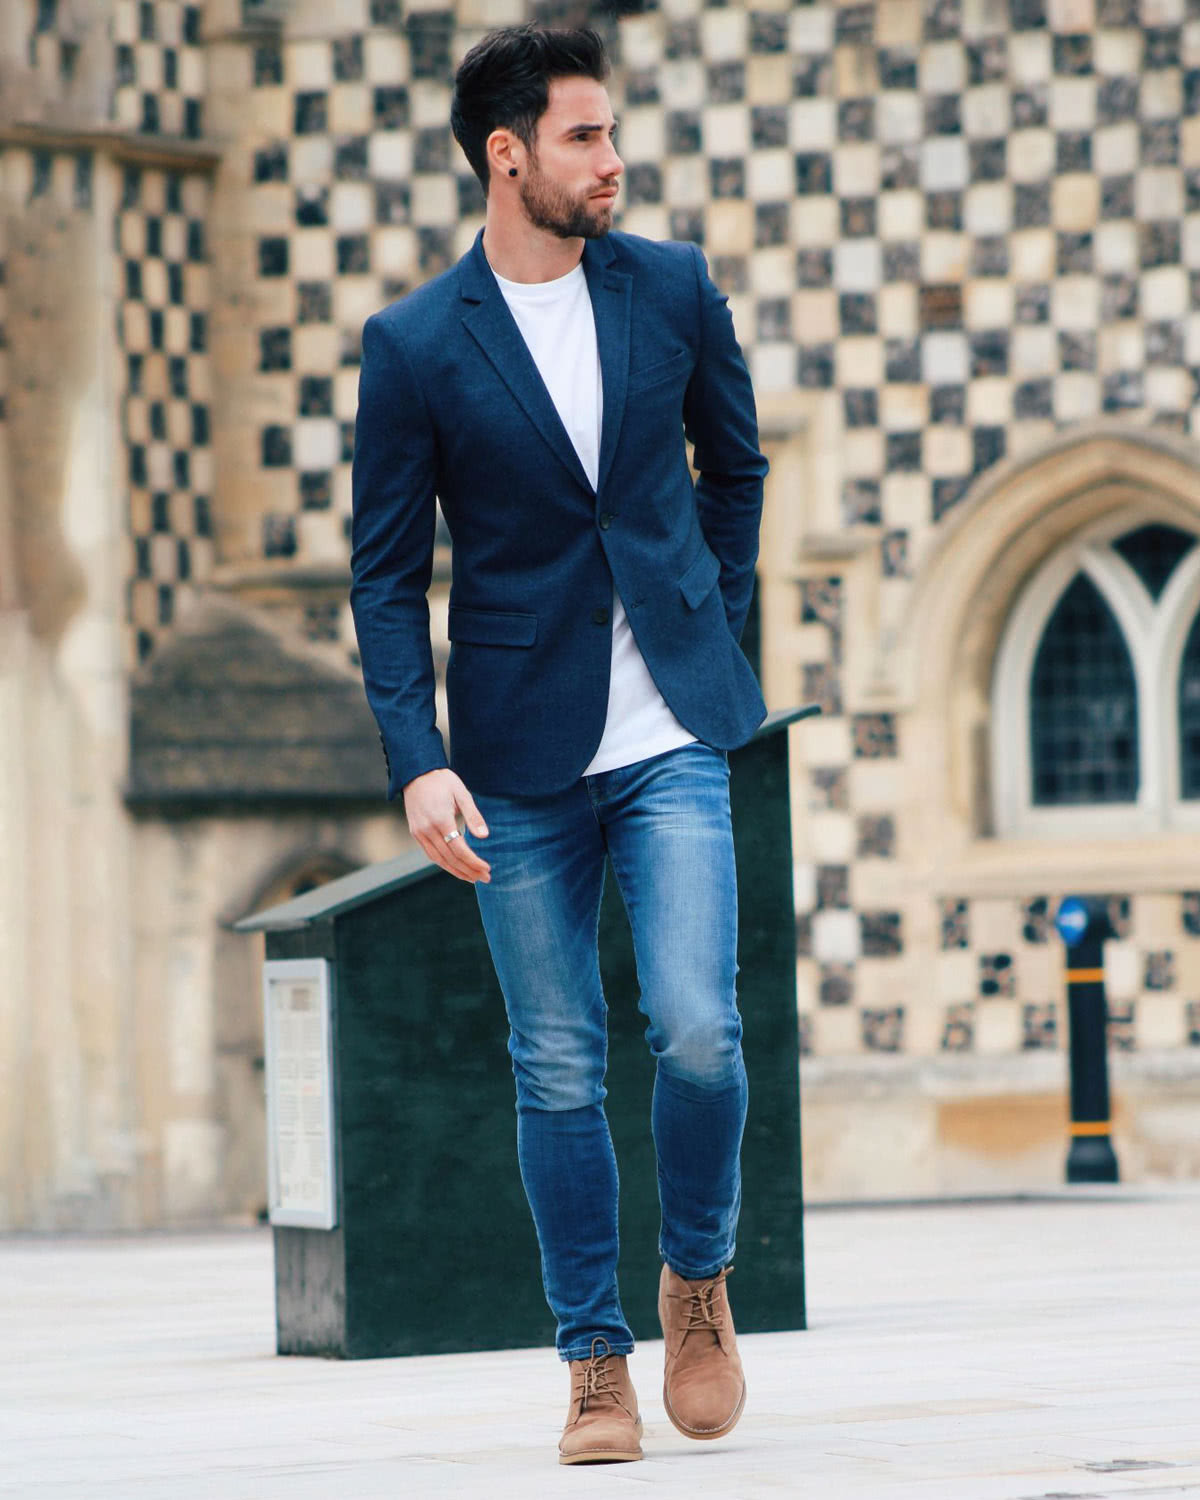 relaxed smart casual dress code men style - Luxe Digital